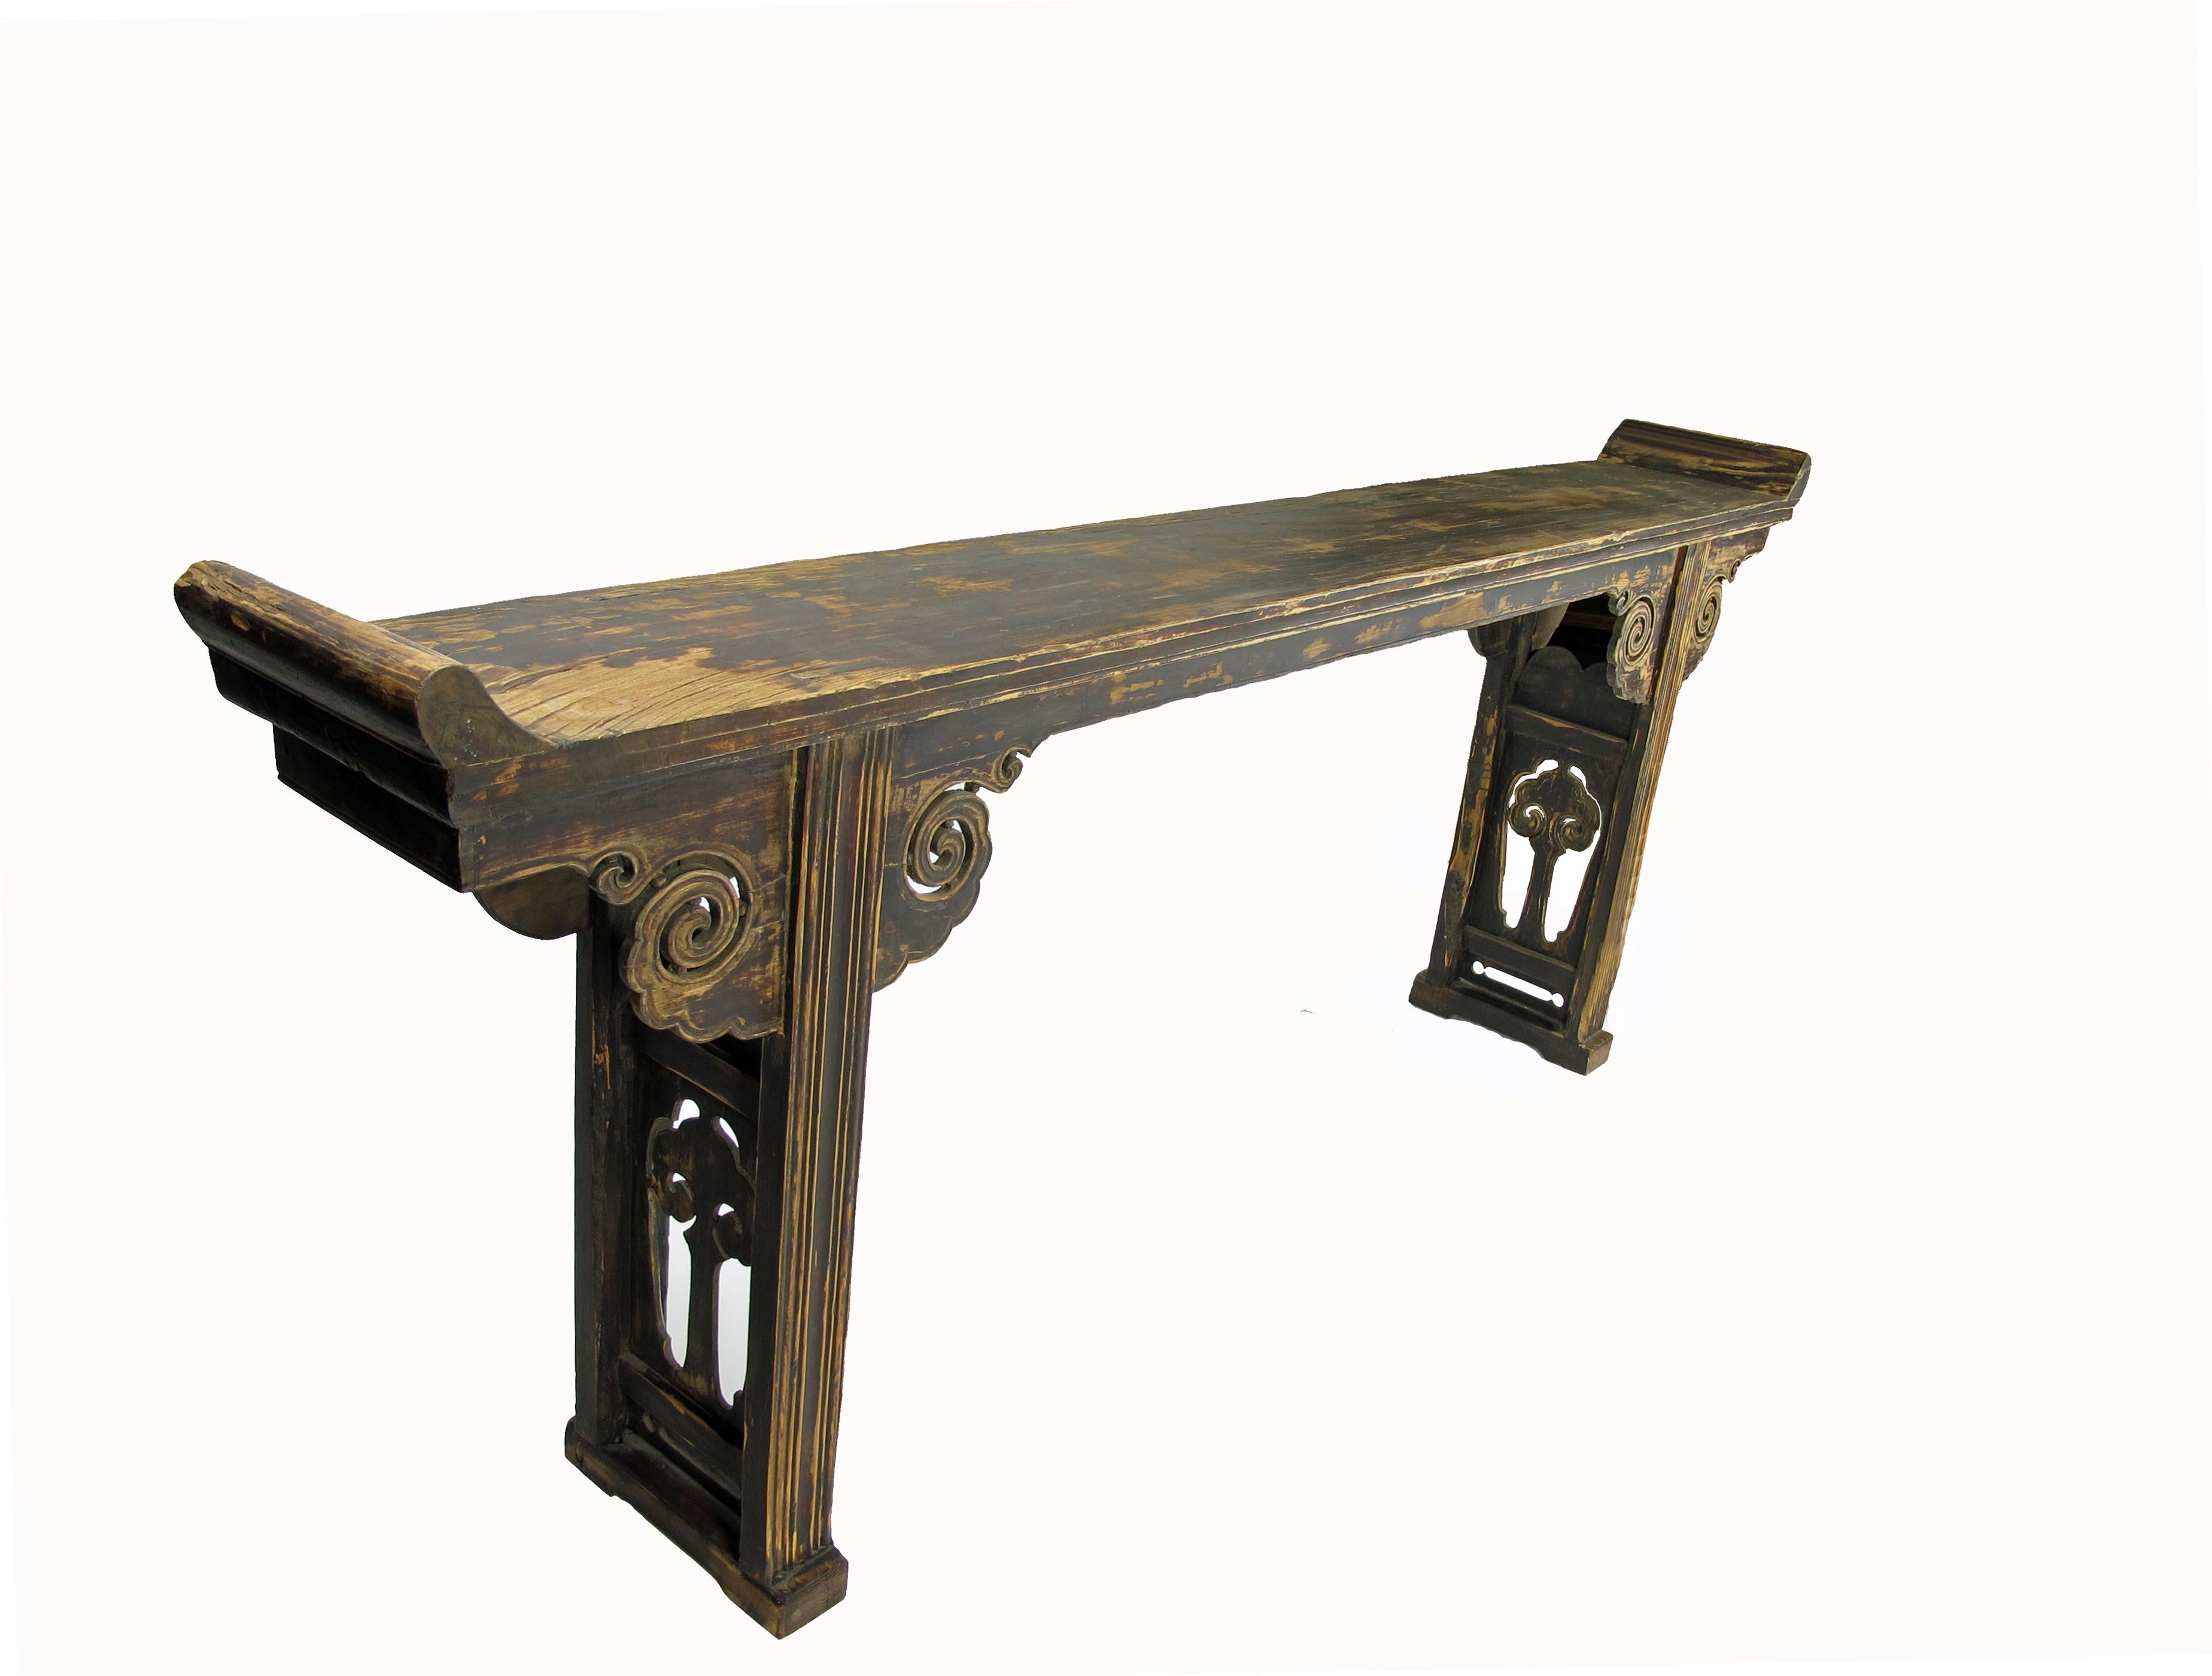 Measuring over 7 feet long, this striking long altar table could either go against a wide wall or function as a room purpose divider in an open space. The legs are made of two open carved of double Ruyi. Ruyi is literally “as desired” or “as you